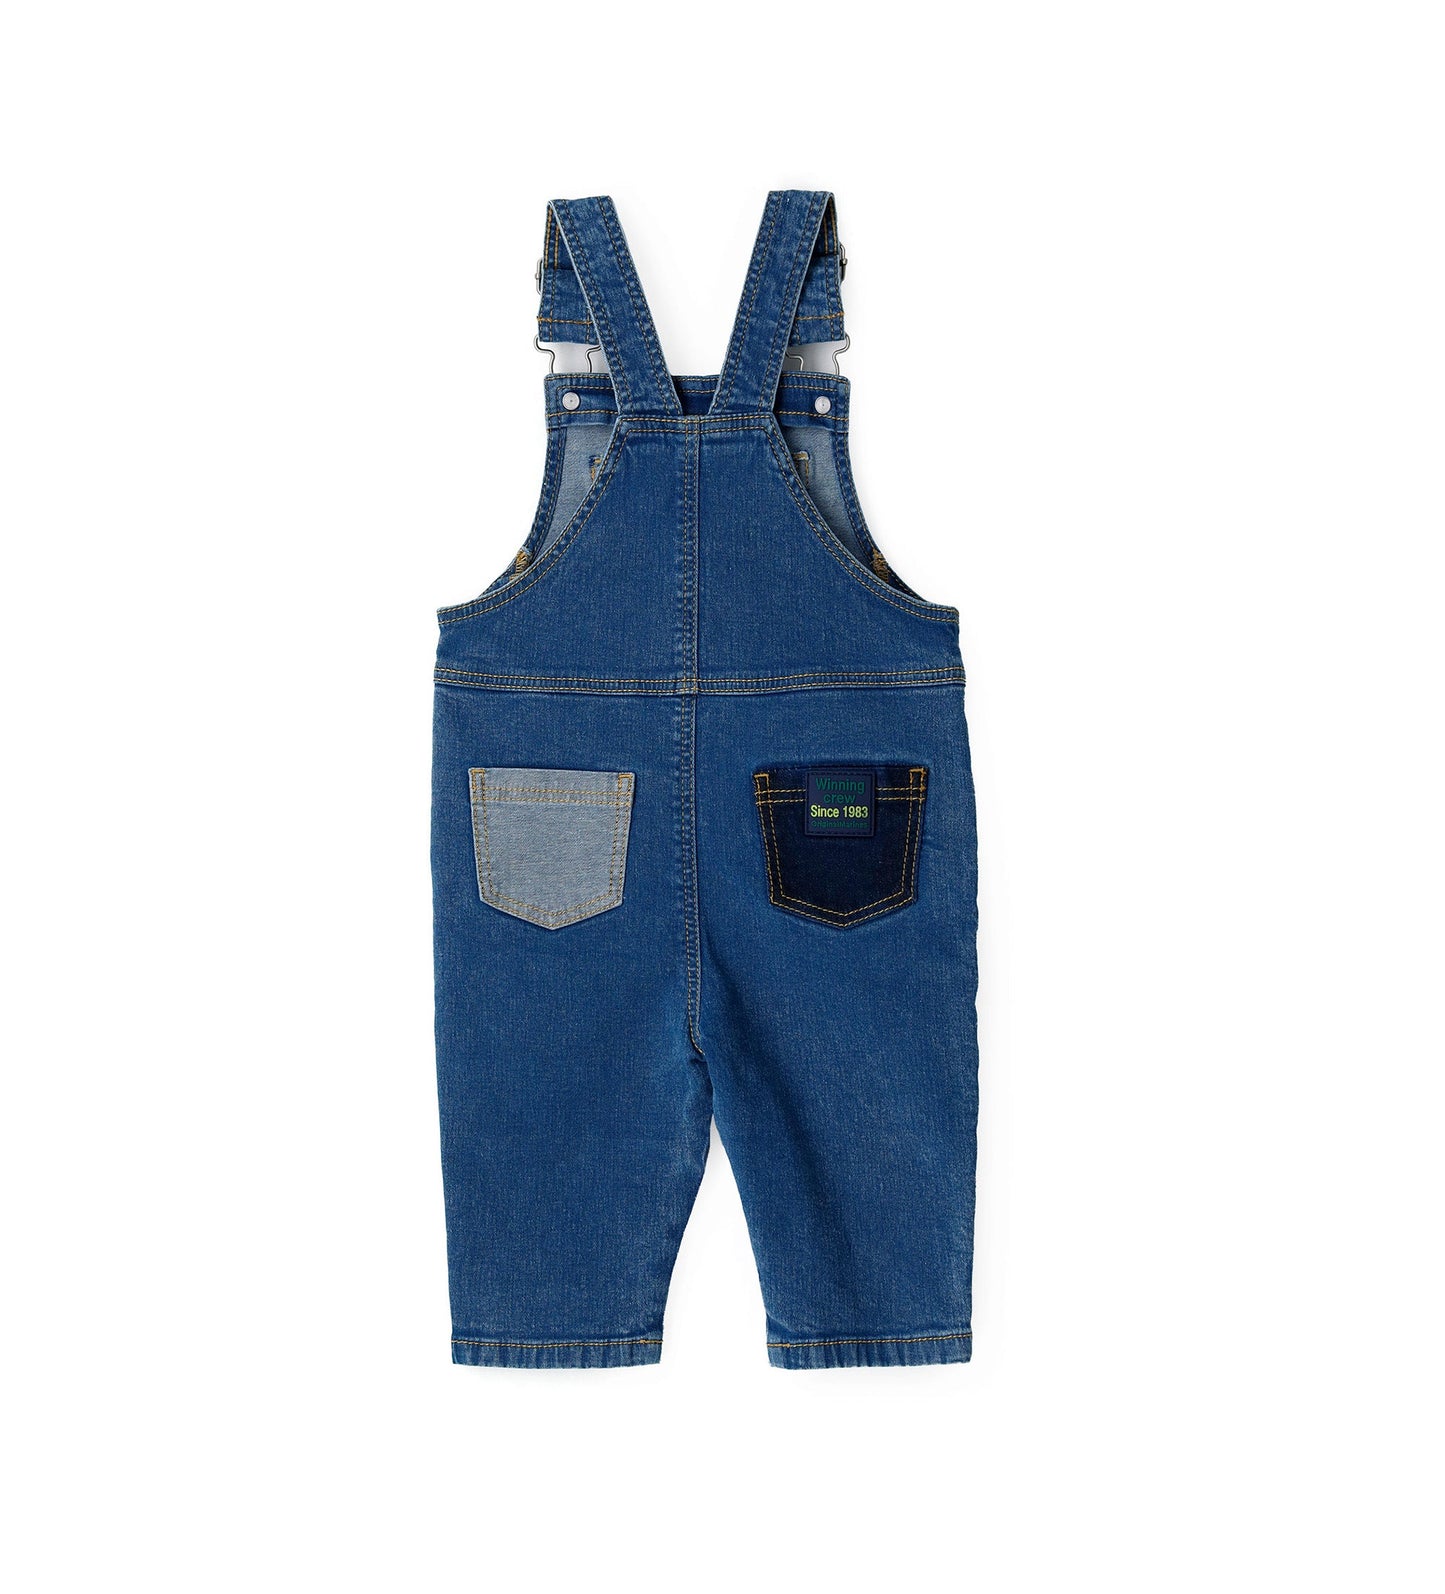 BABY BOY'S DUNGAREES